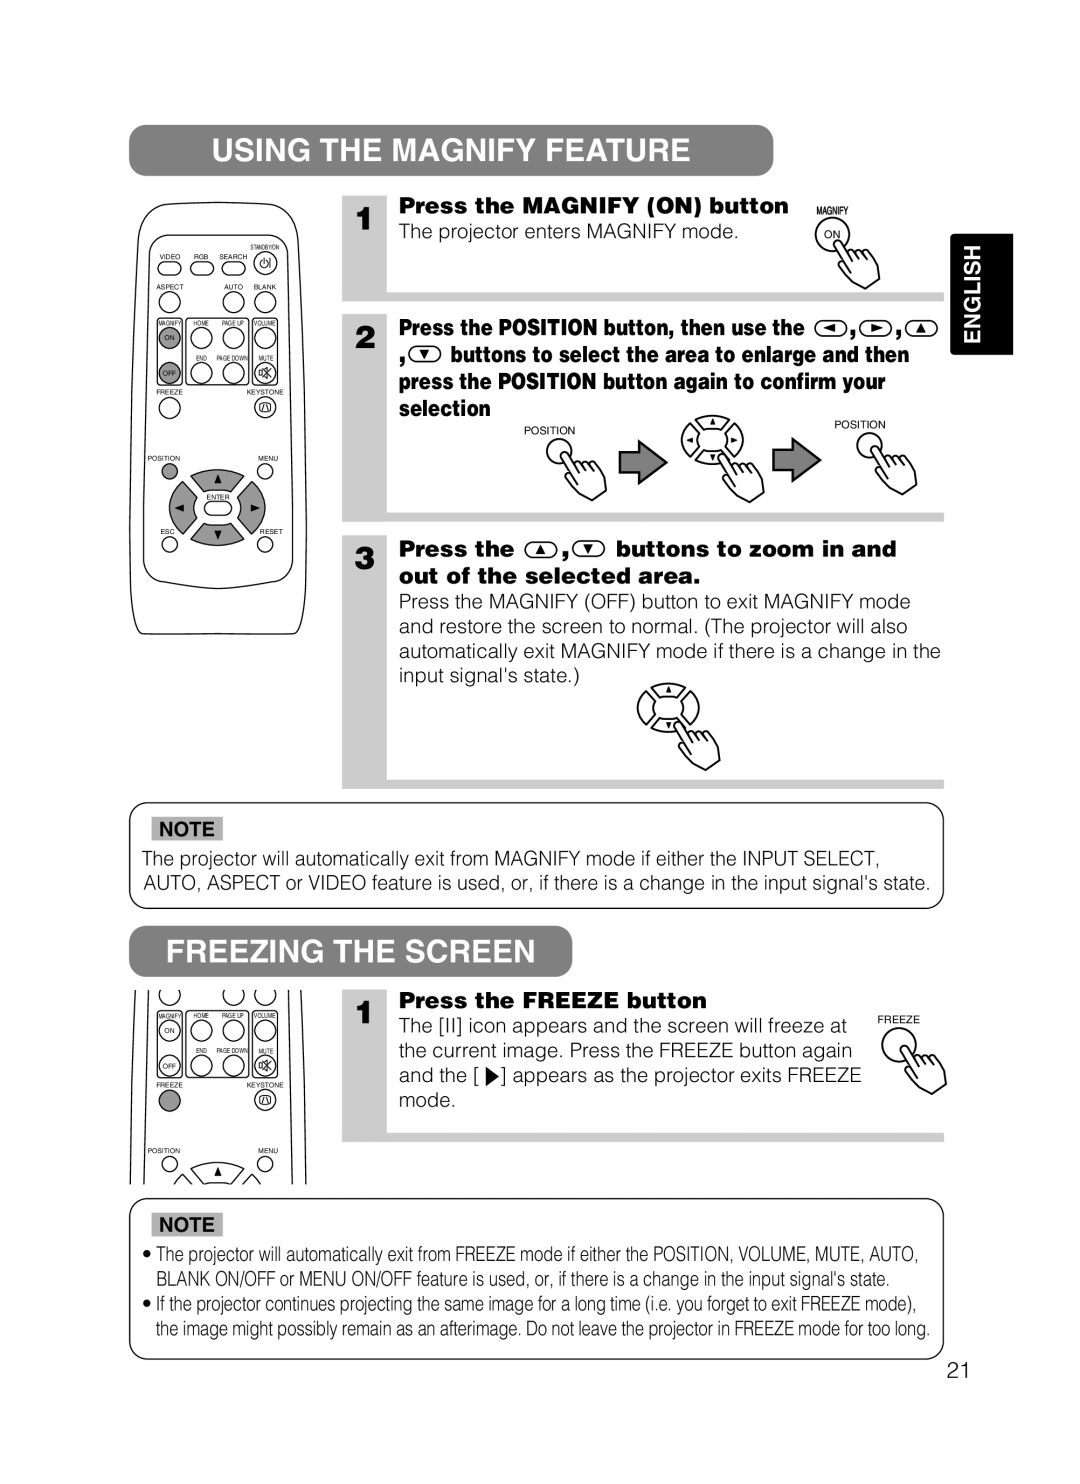 Dukane 28A8049B user manual Using The Magnify Feature, Freezing The Screen, Press the MAGNIFY ON button, selection, English 